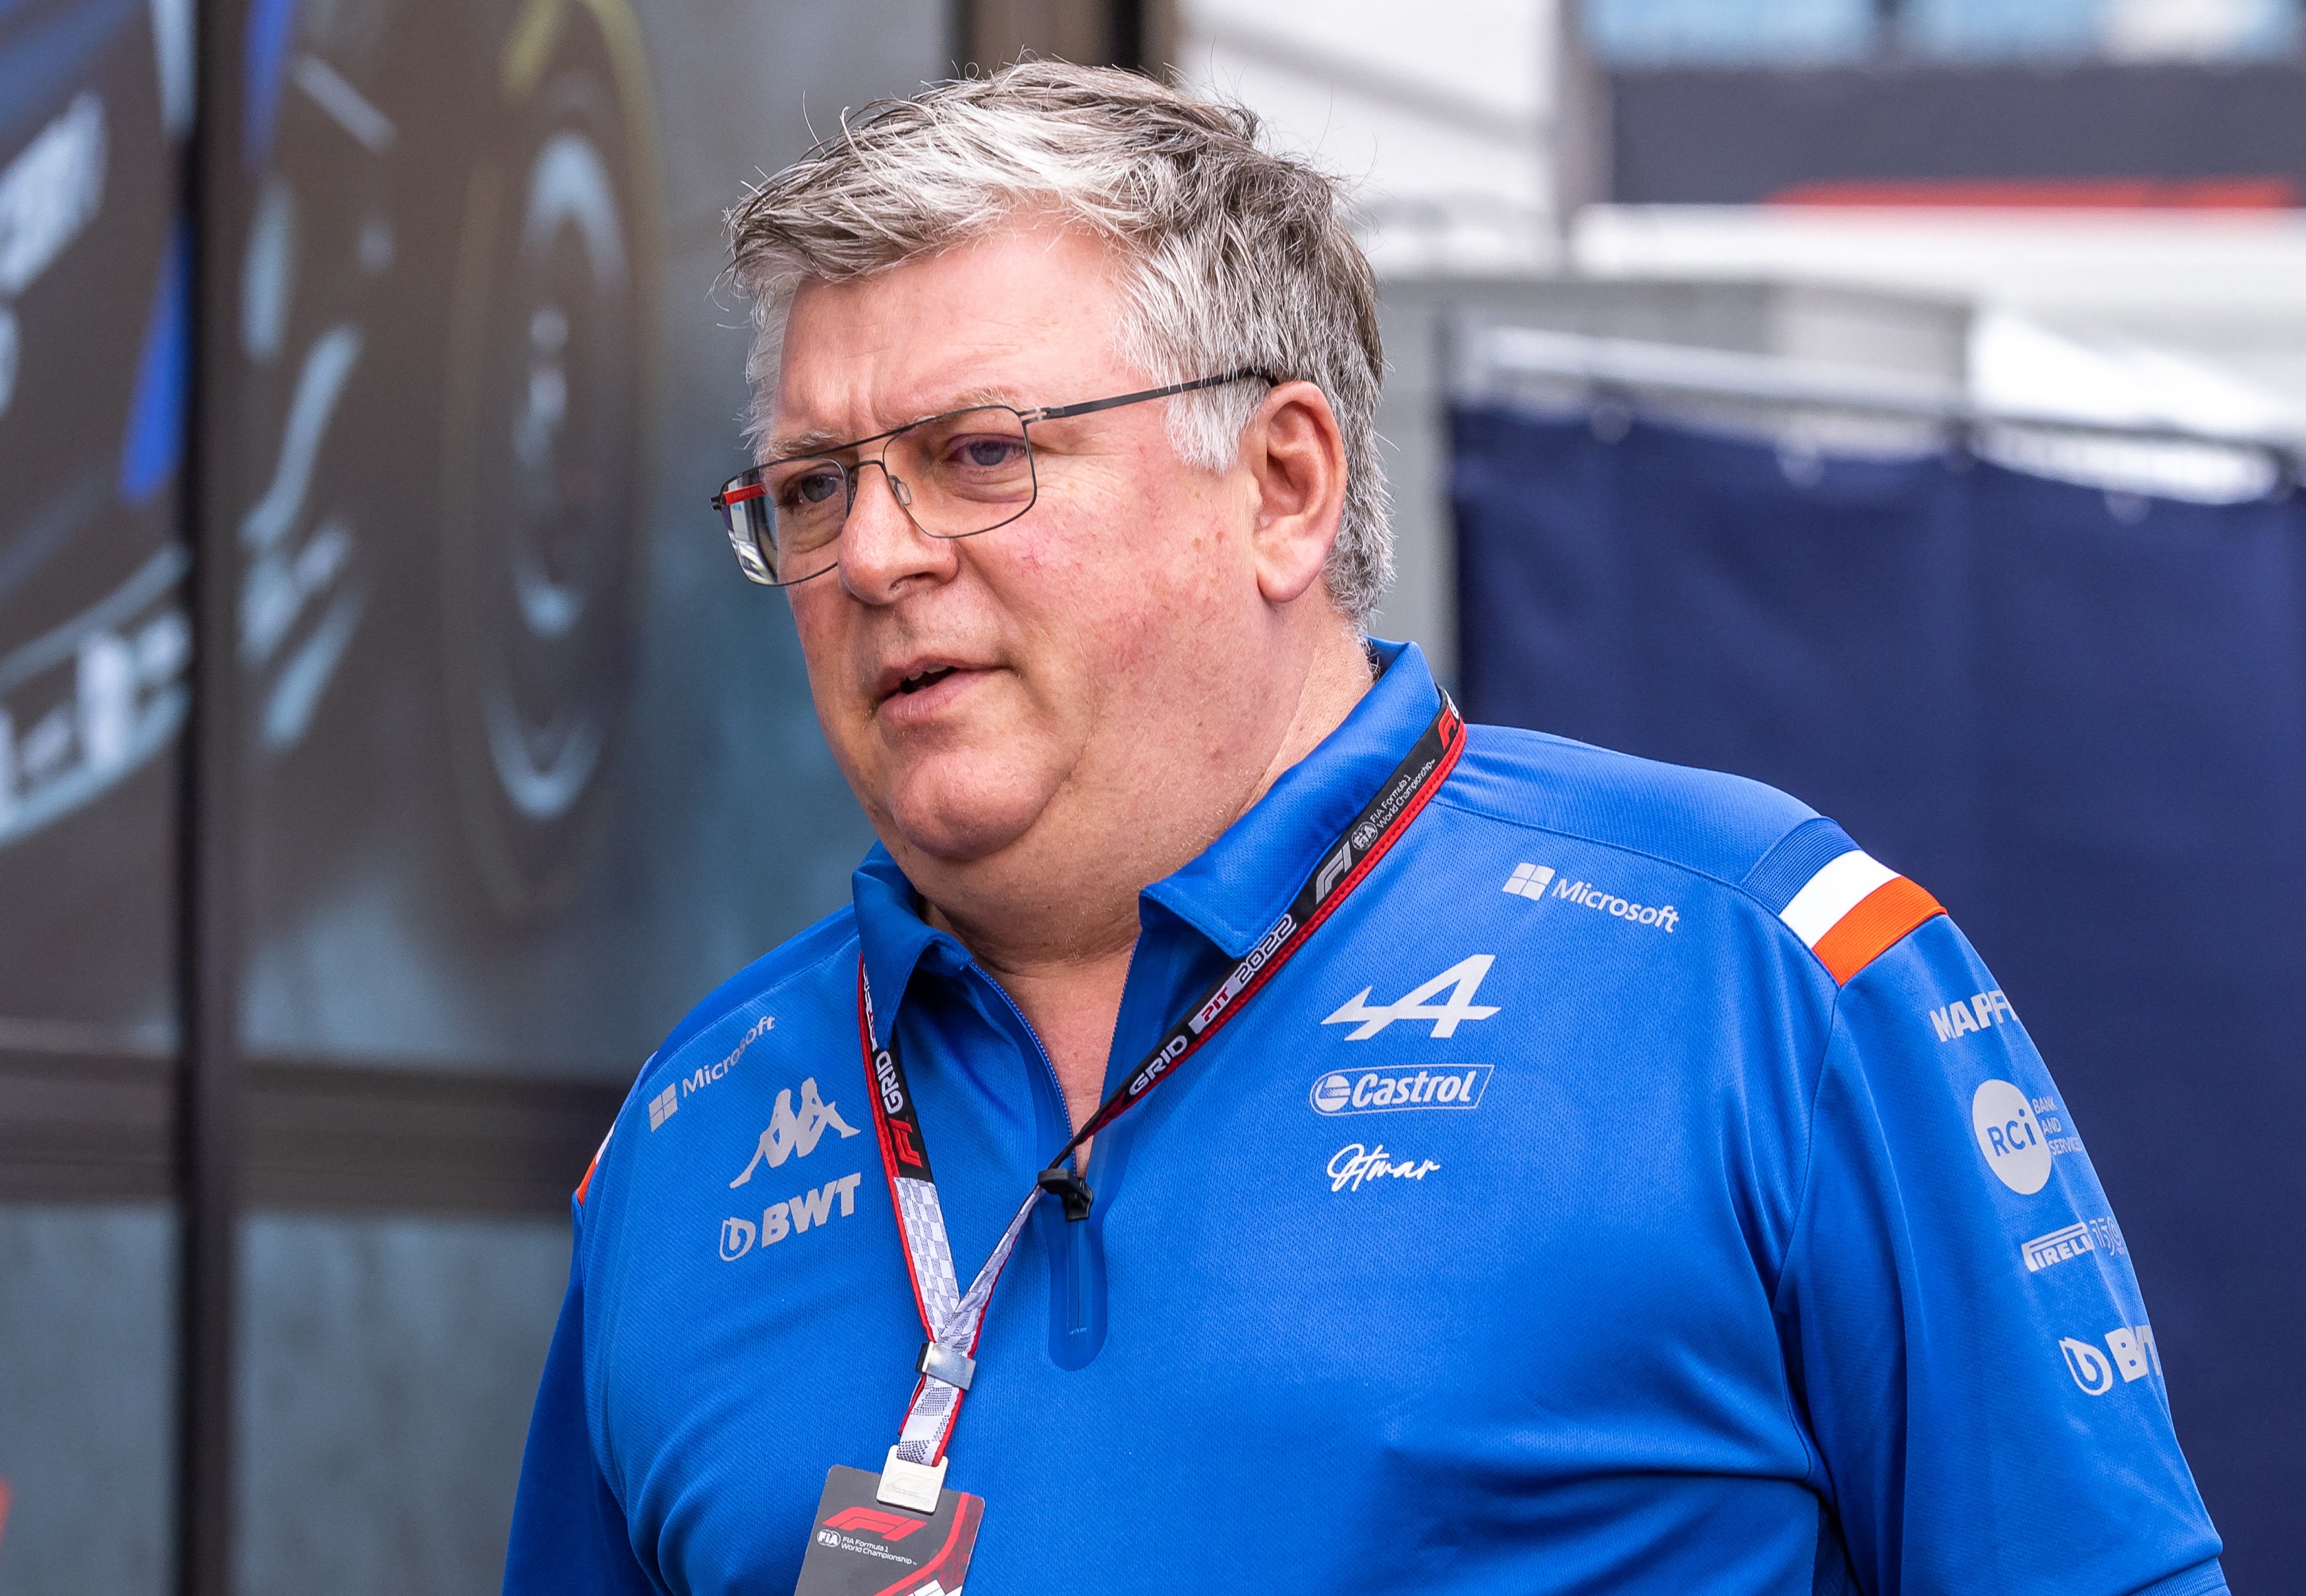 Alpine boss Otmar Szafnauer says he was ‘surprised’ when he found out Fernando Alonso was leaving